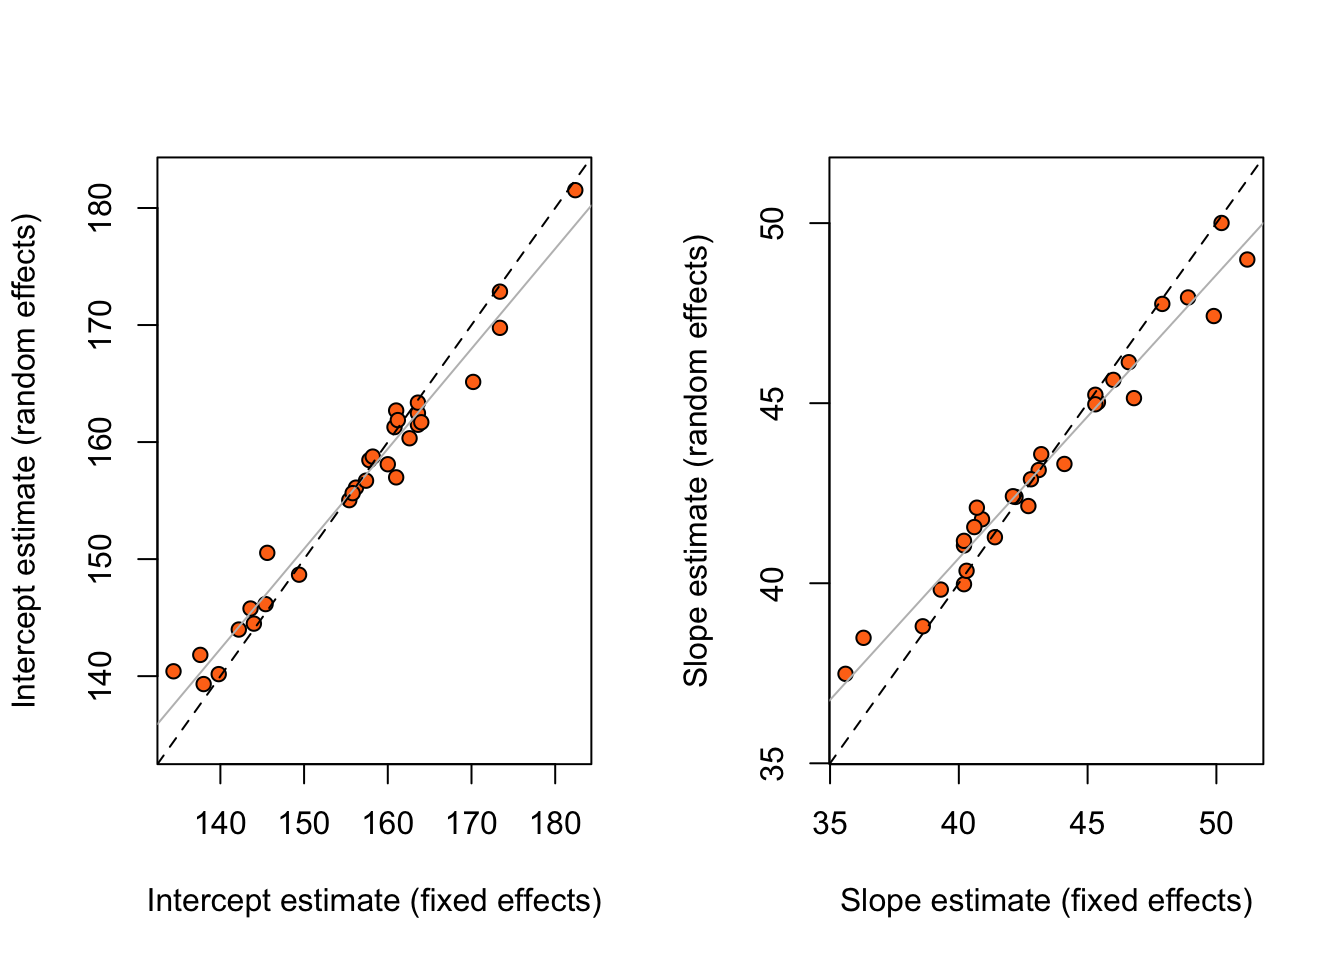 Estimates of random and fixed effects for the rat growth data. The dashed line is a line with intercept zero and slope 1, and the solid line is from the least squares fit of the observed points.